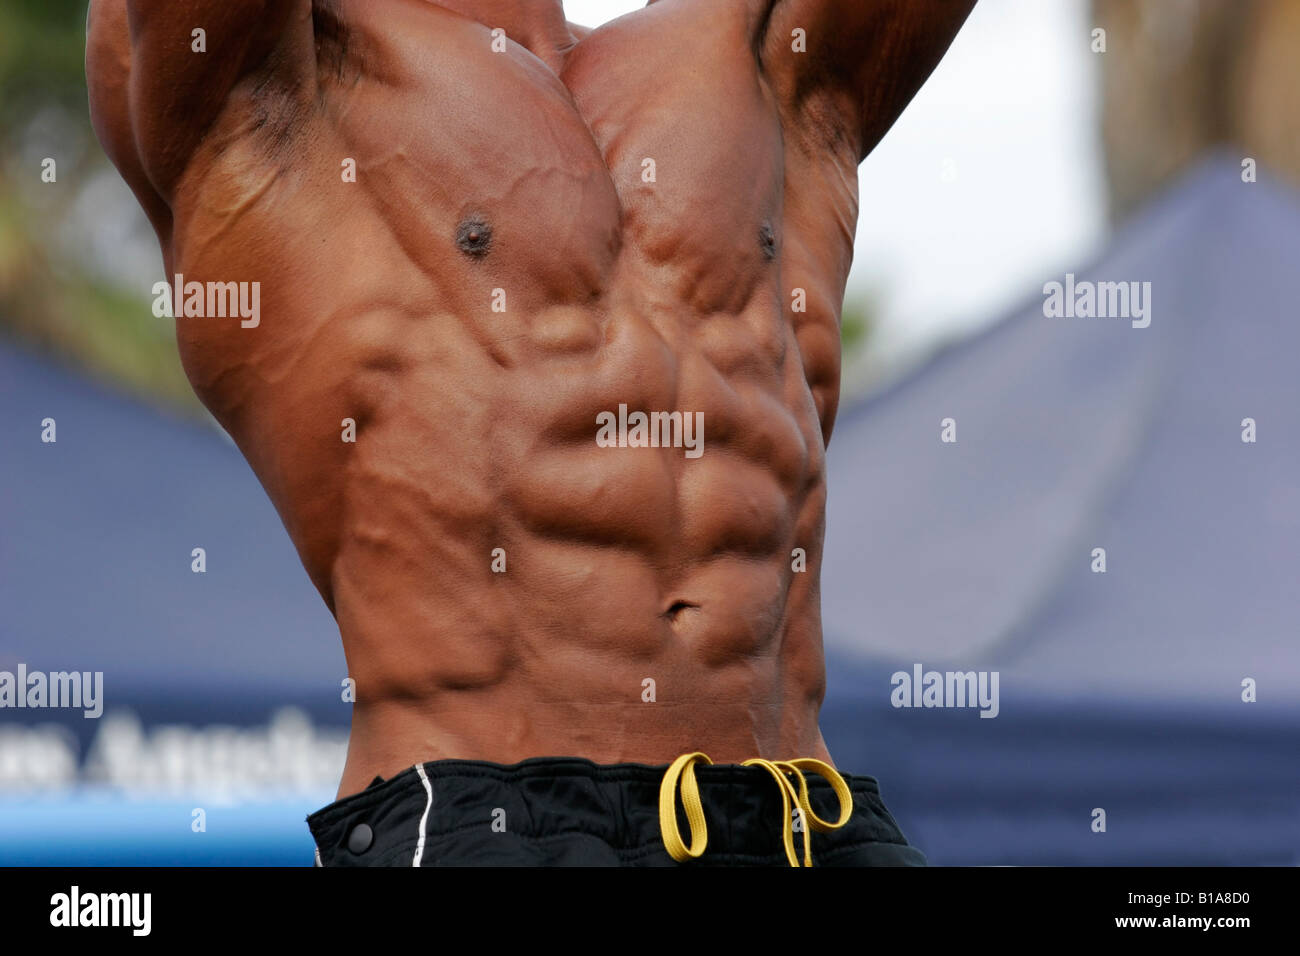 Bodybuilder flexing his abdominal muscles during a workout at an outdoor  gym Stock Photo - Alamy